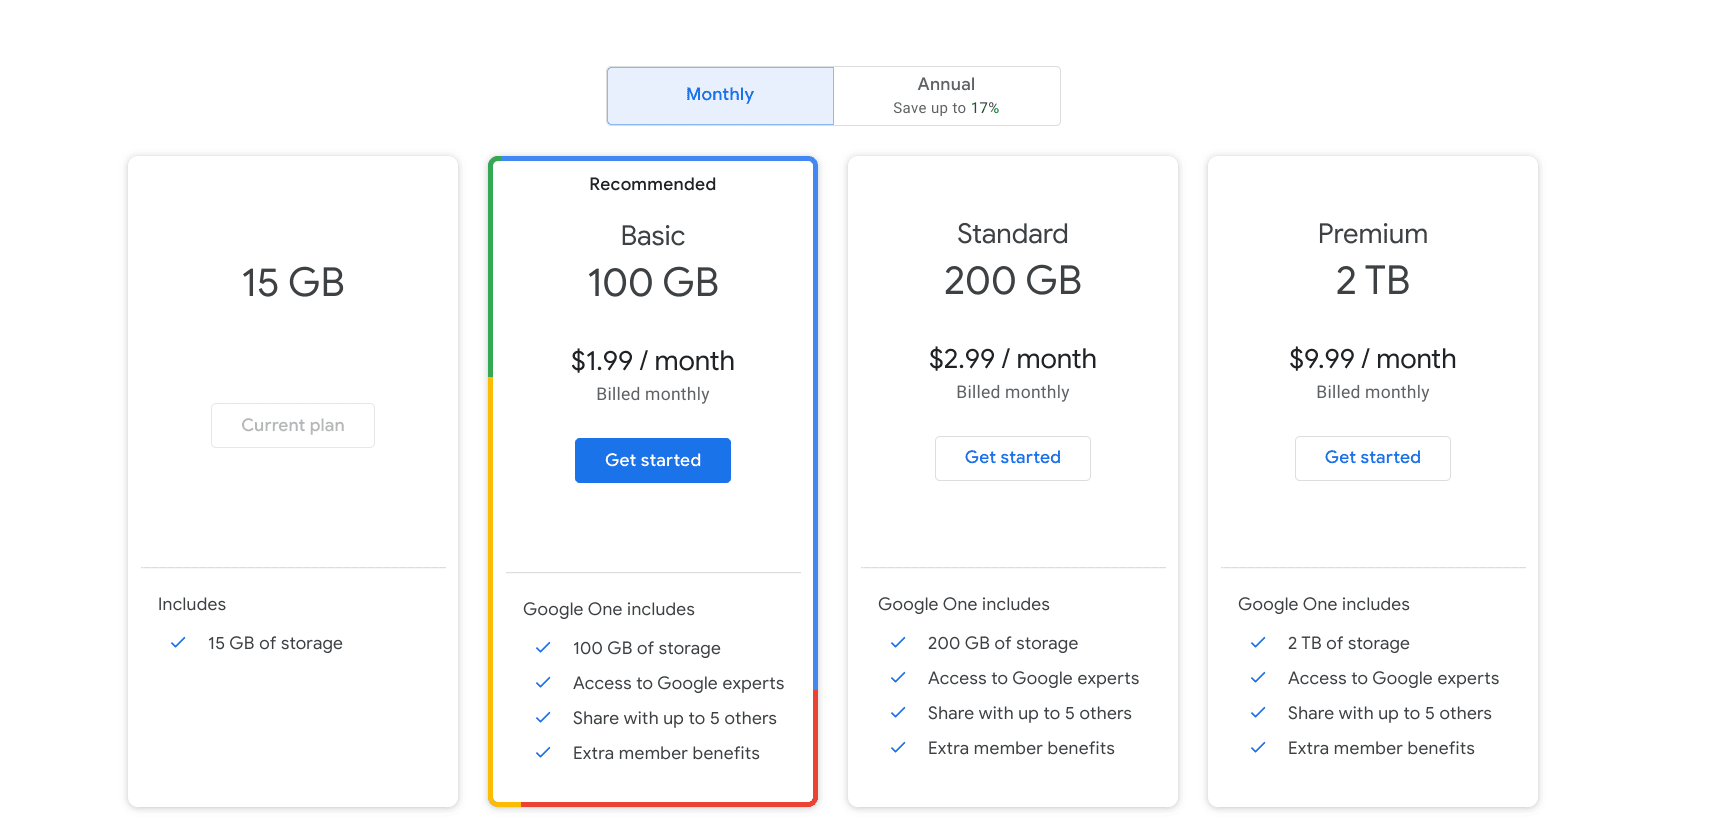 Google One pricing plans